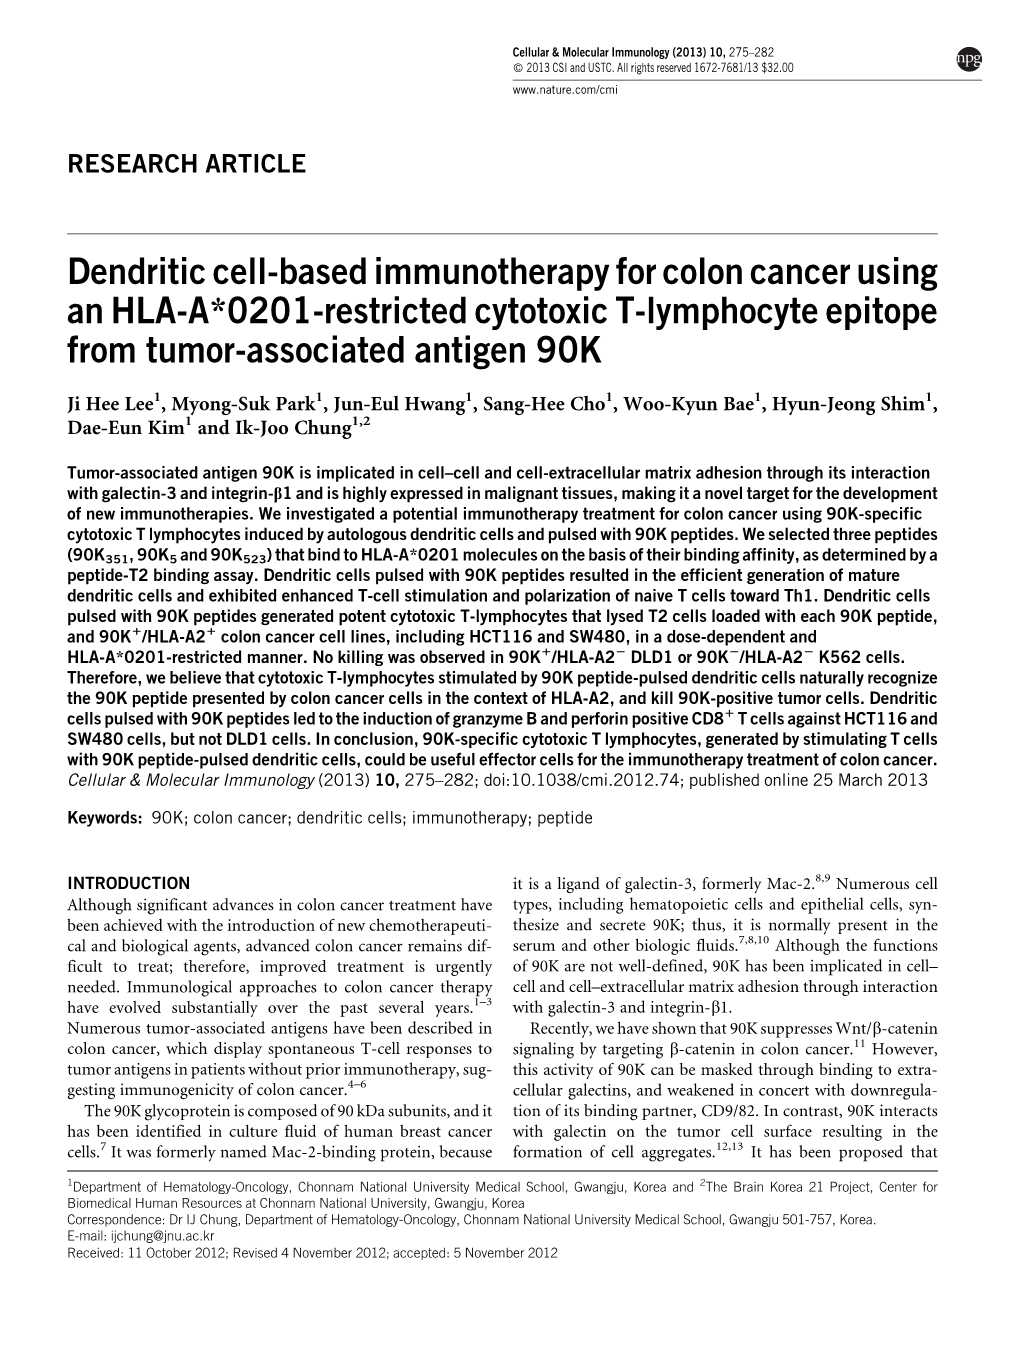 Dendritic Cell-Based Immunotherapy for Colon Cancer Using an HLA-A*0201-Restricted Cytotoxic T-Lymphocyte Epitope from Tumor-Associated Antigen 90K